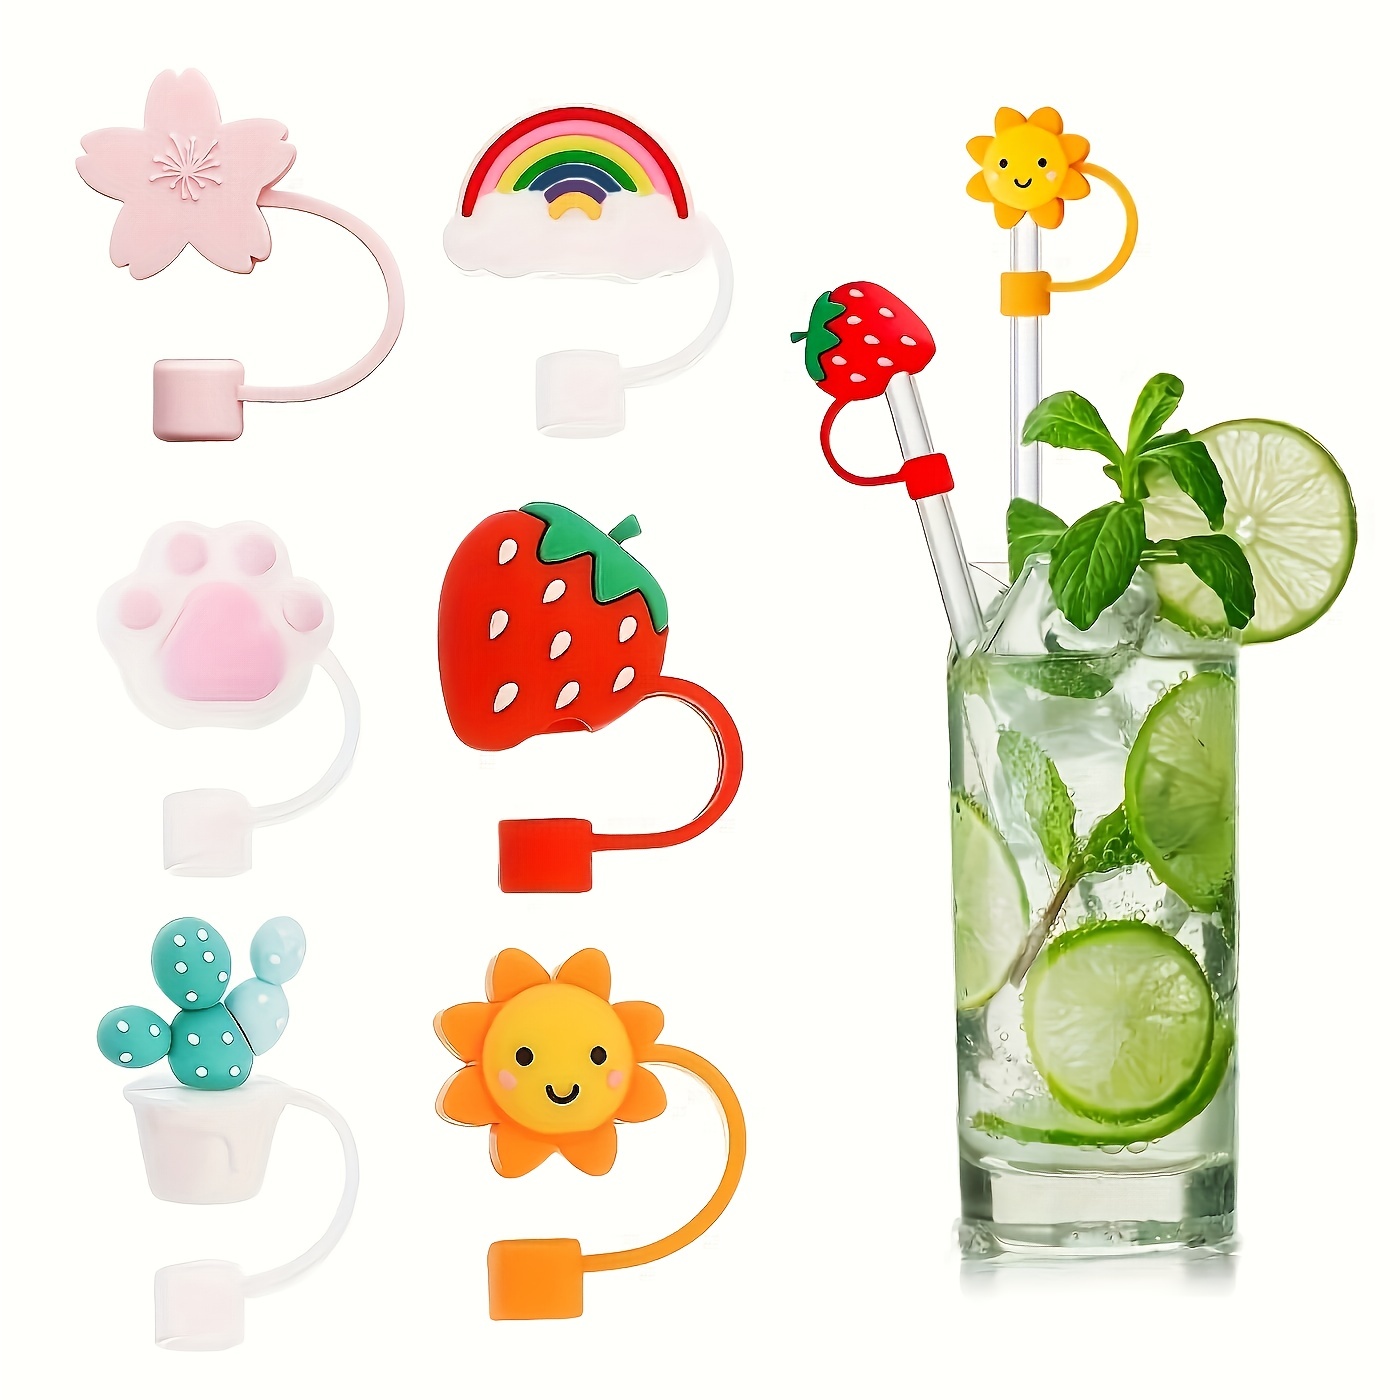 

1pc/6pcs, Straw Tips Cover, Cute Cartoon Reusable Drinking Straw Plug, Portable Cute Straw Caps Covers - Keep Your Straws Clean And Fresh! For Home Kitchen